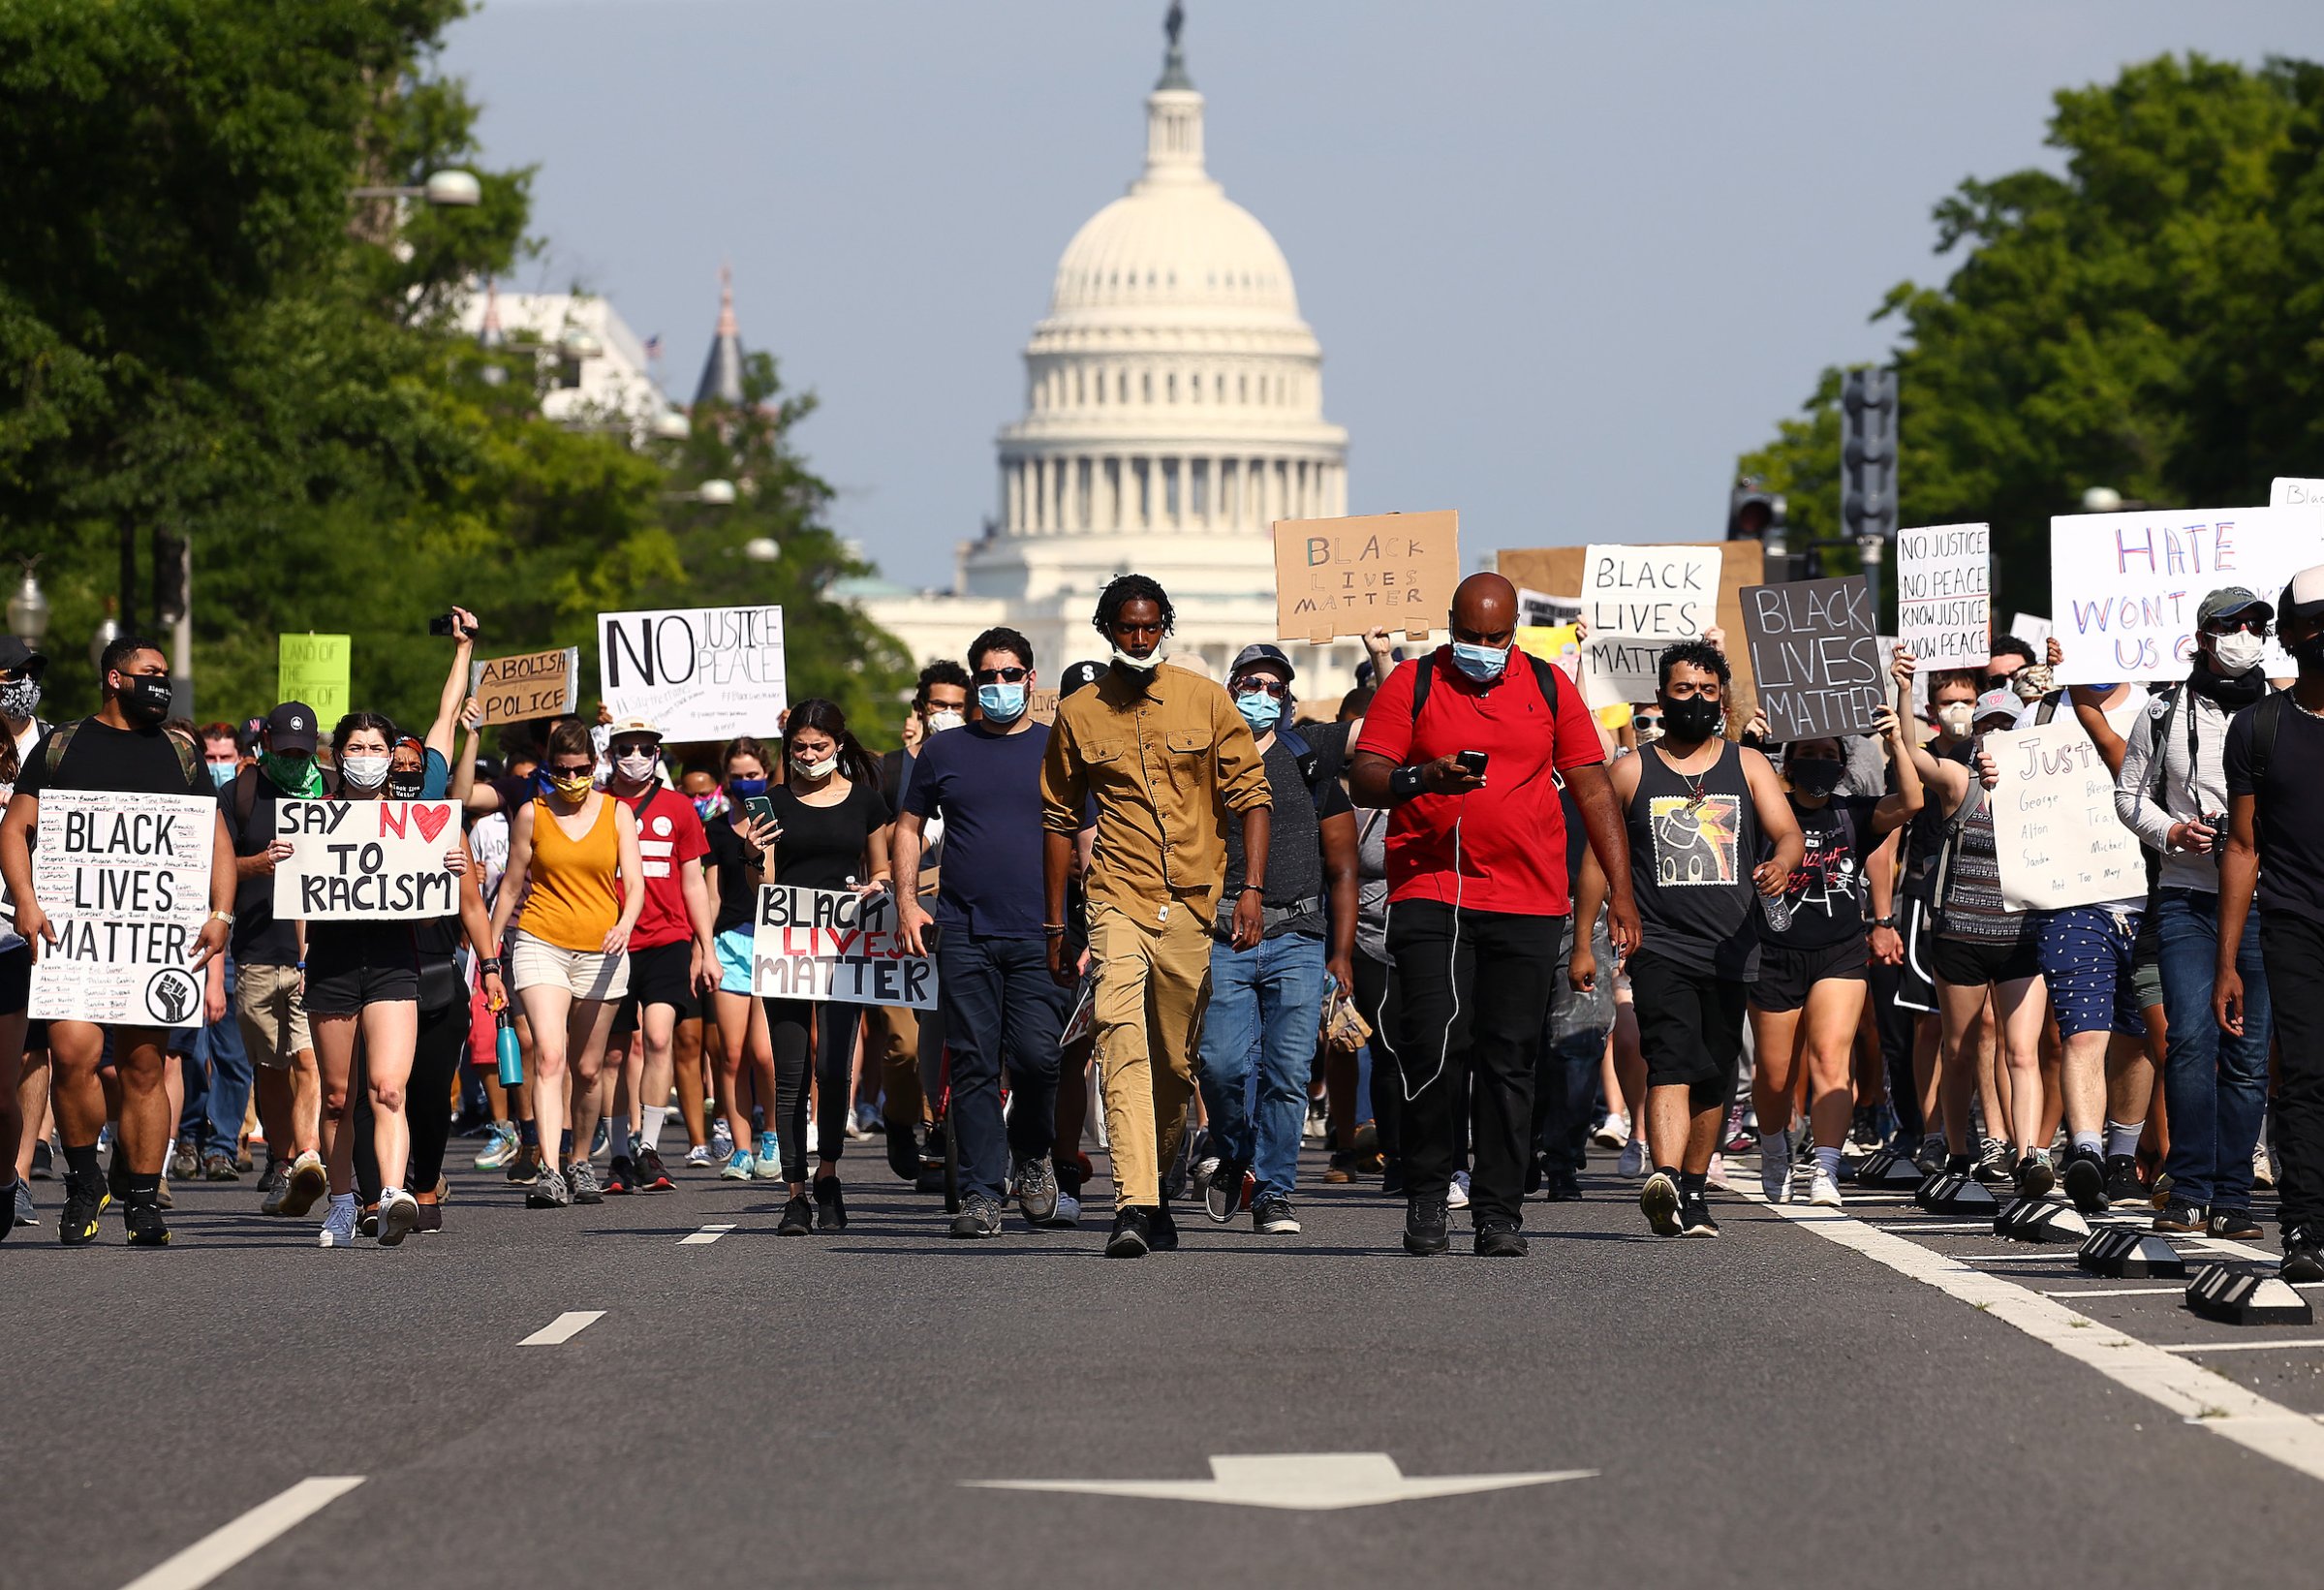 Protesters Demonstrate In D.C. Against Death Of George Floyd By Police Officer In Minneapolis